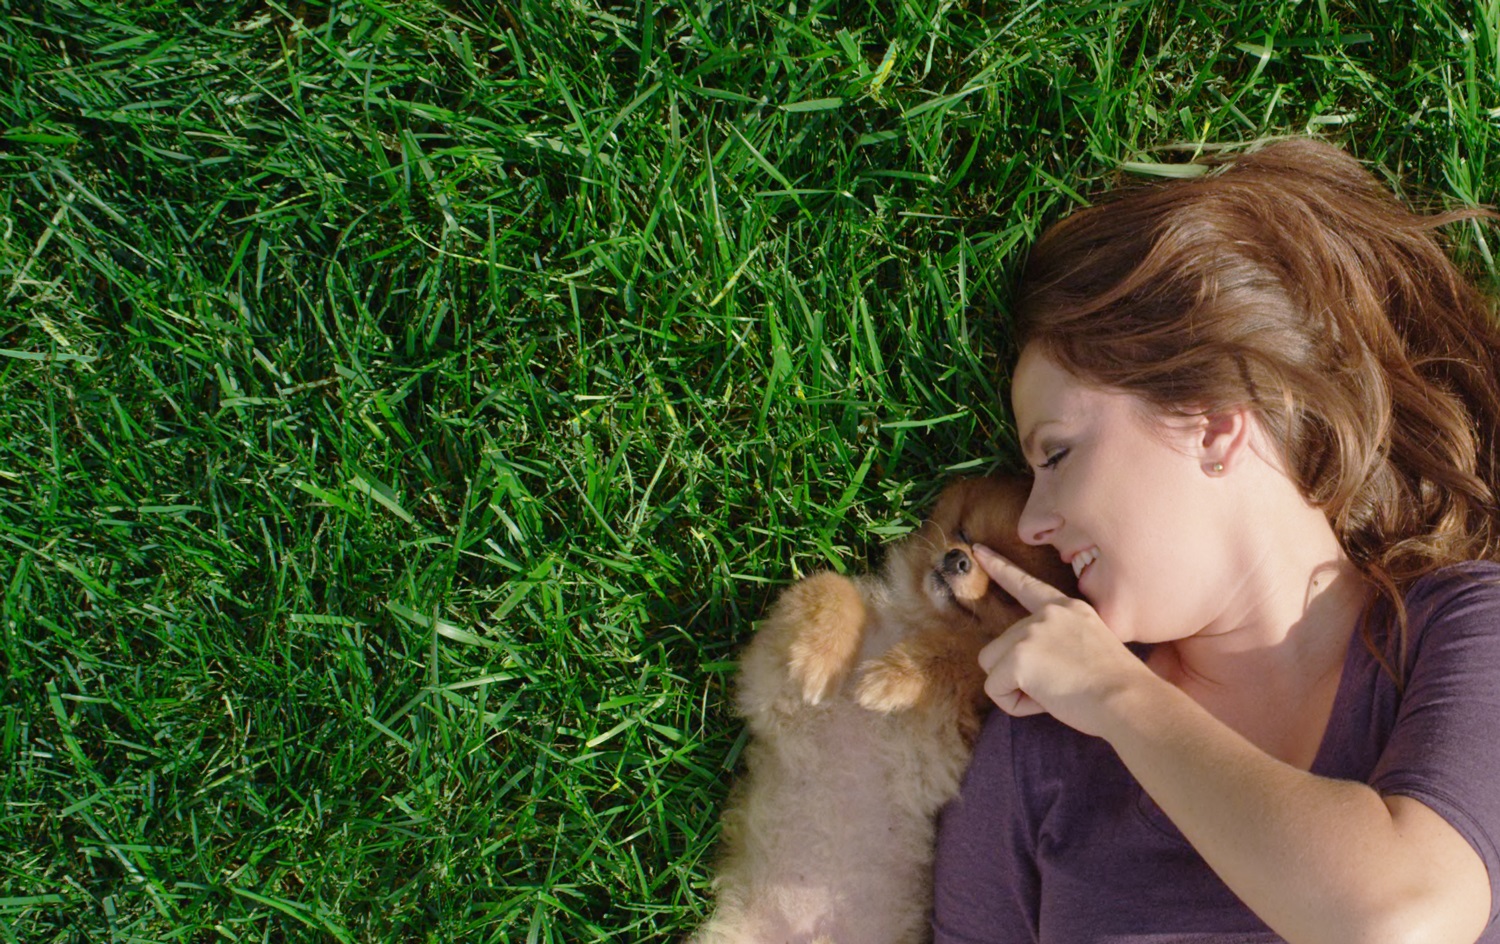 Pretty Woman playing with cute puppy on manicured green grass showing lawn care in Wylie